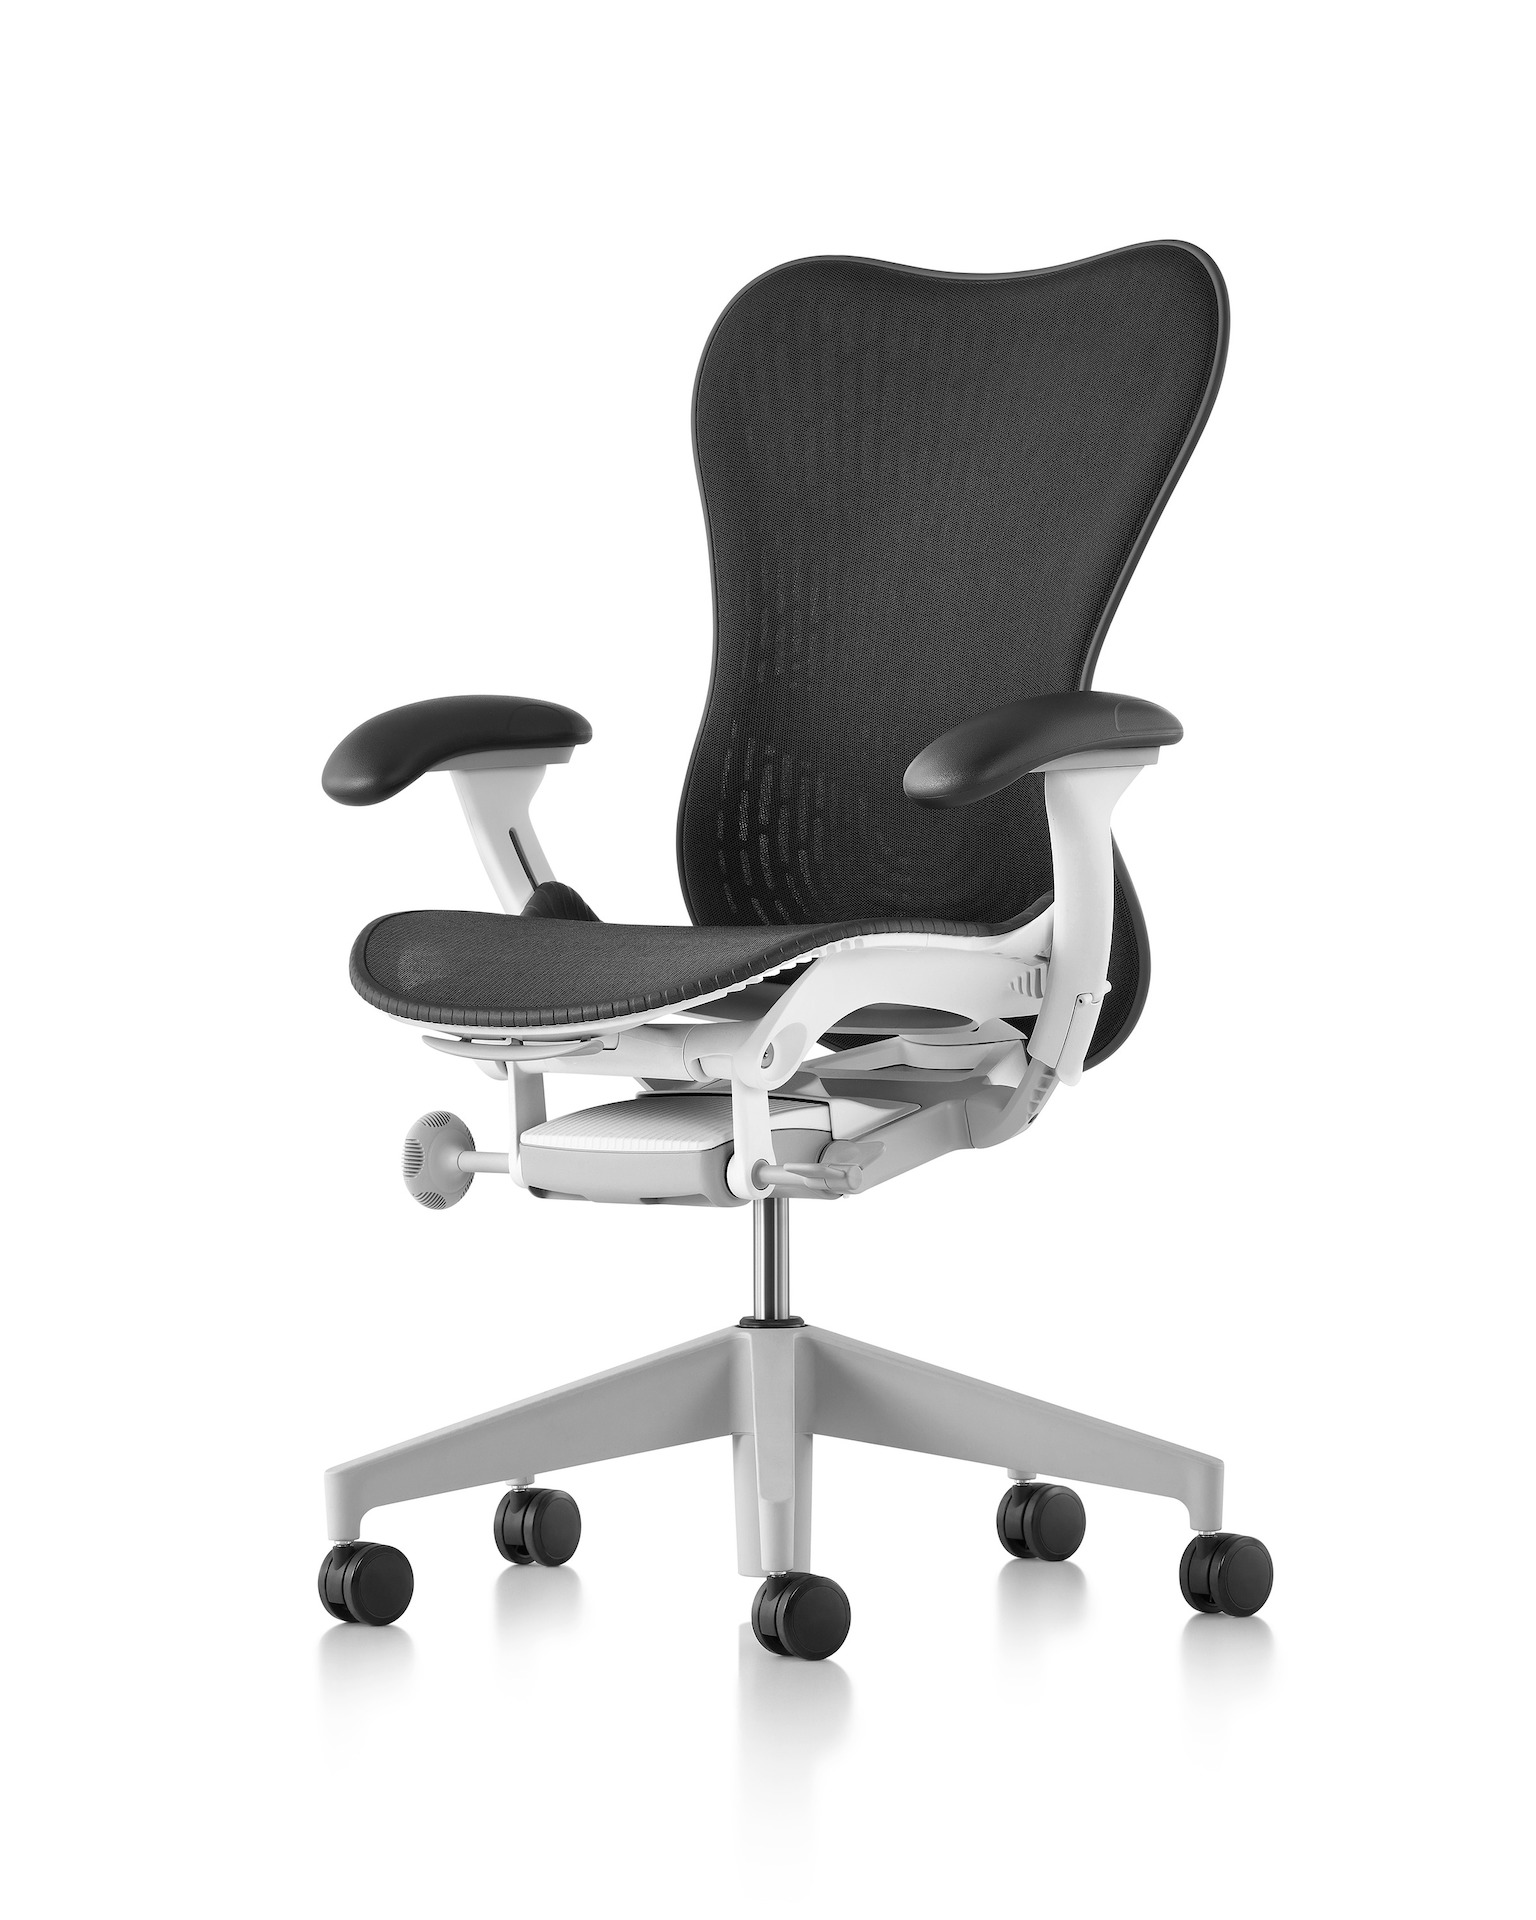 Three-quarter front view of a Mirra 2 Chair in dark grey with a white frame.